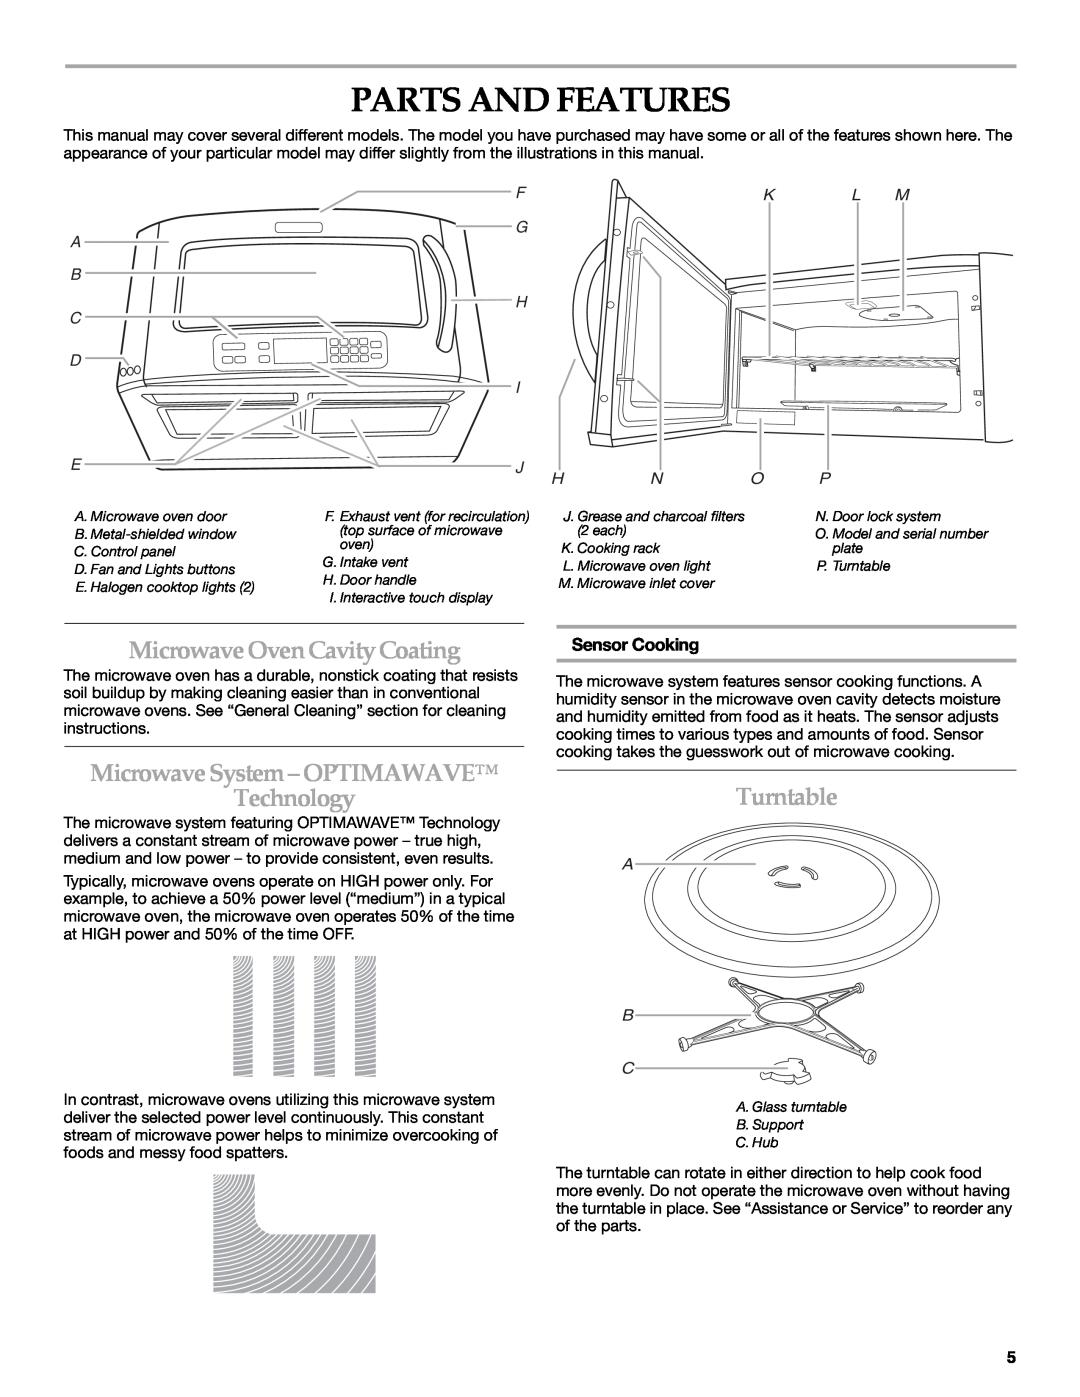 KitchenAid KHMS2056SBL Parts And Features, MicrowaveOvenCavityCoating, MicrowaveSystem-OPTIMAWAVE Technology, Turntable 